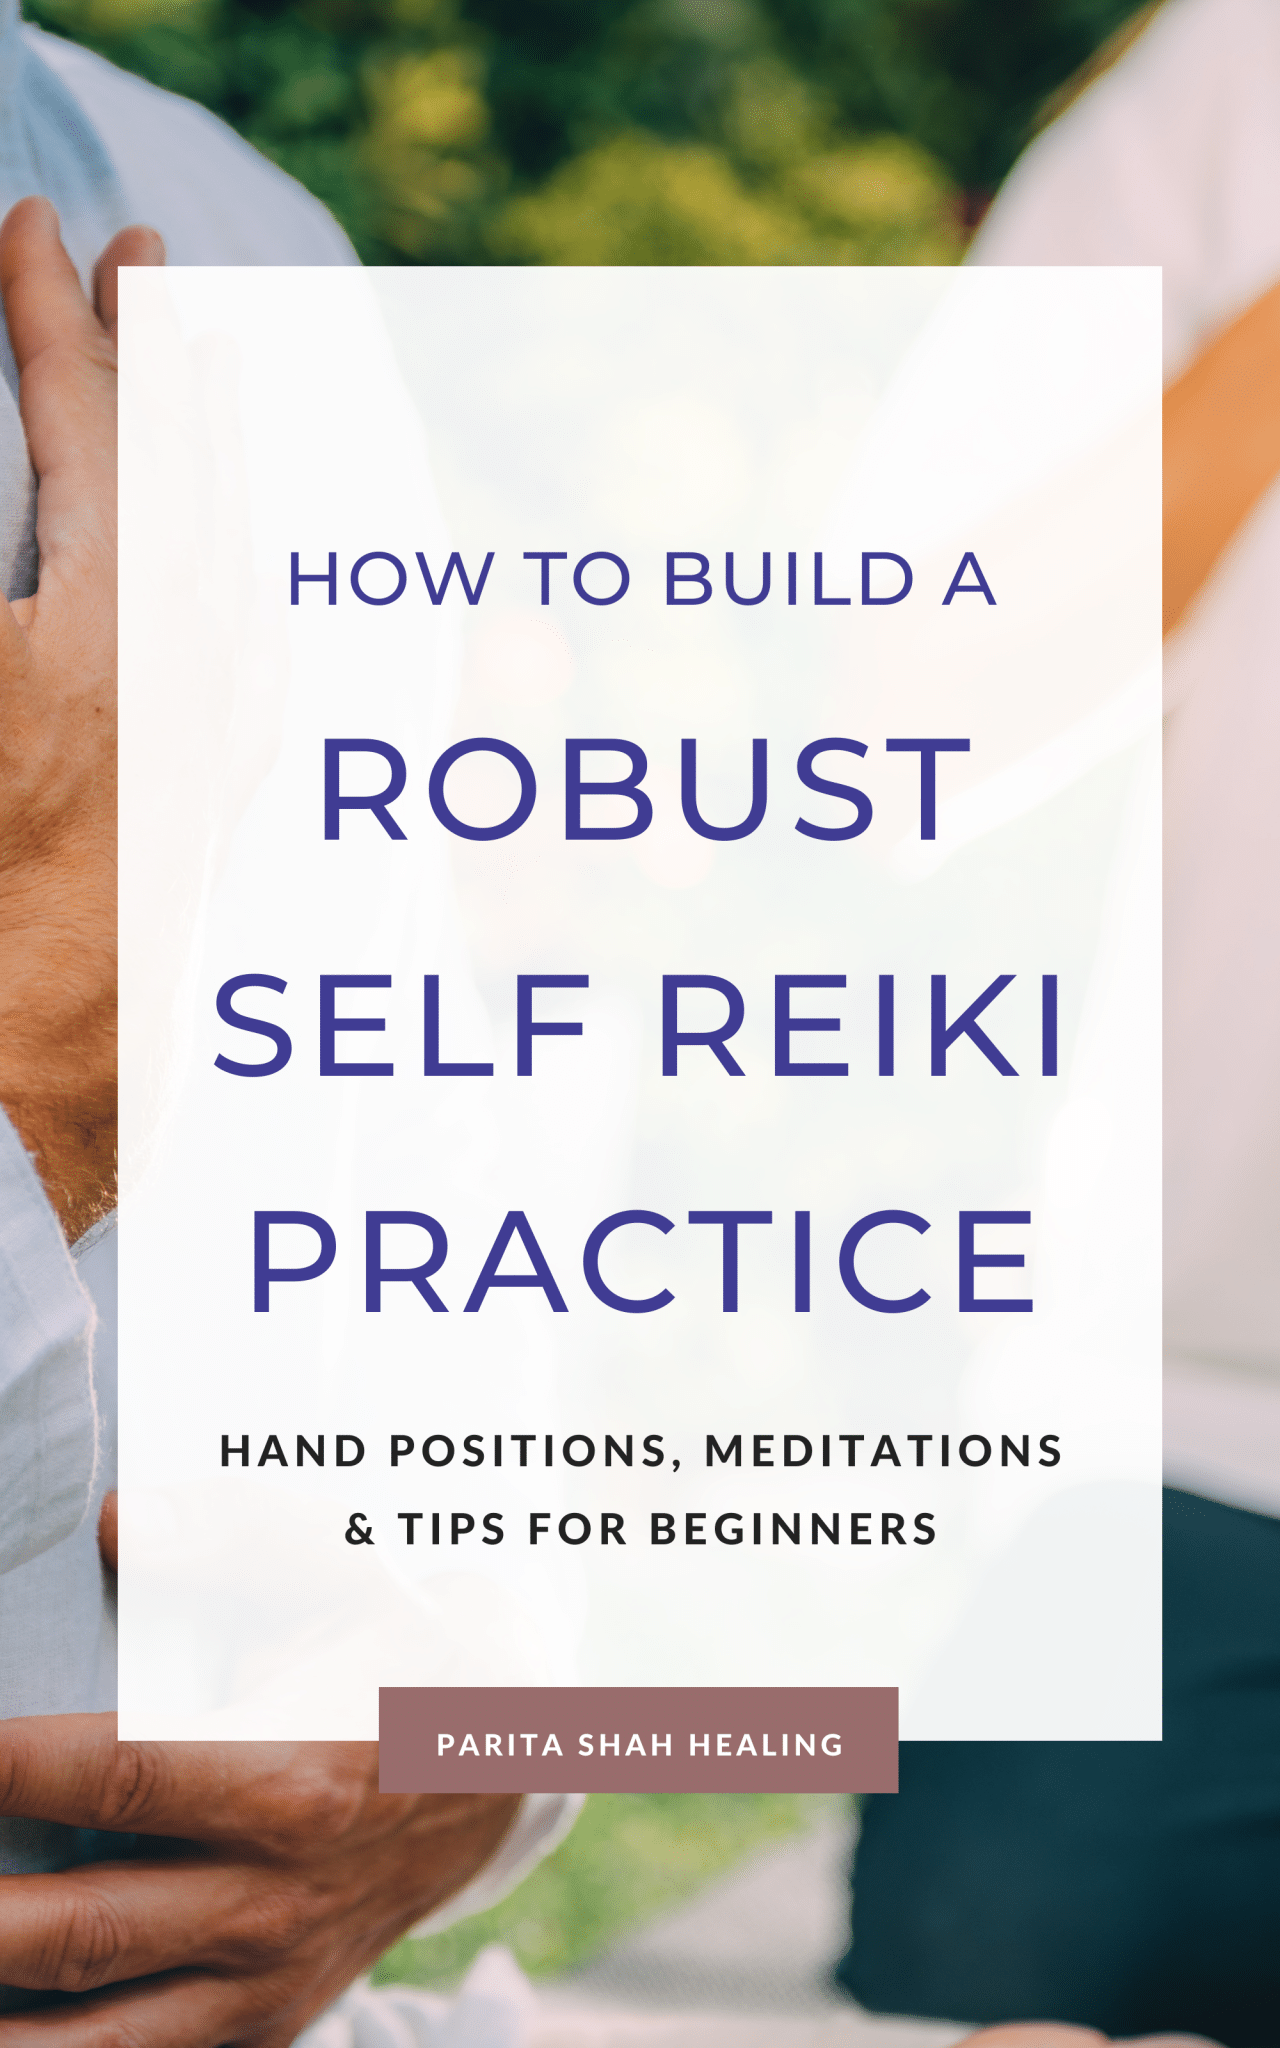 Building a Robust Self Reiki Practice for Beginners: Hand Positions, Meditations & Tips